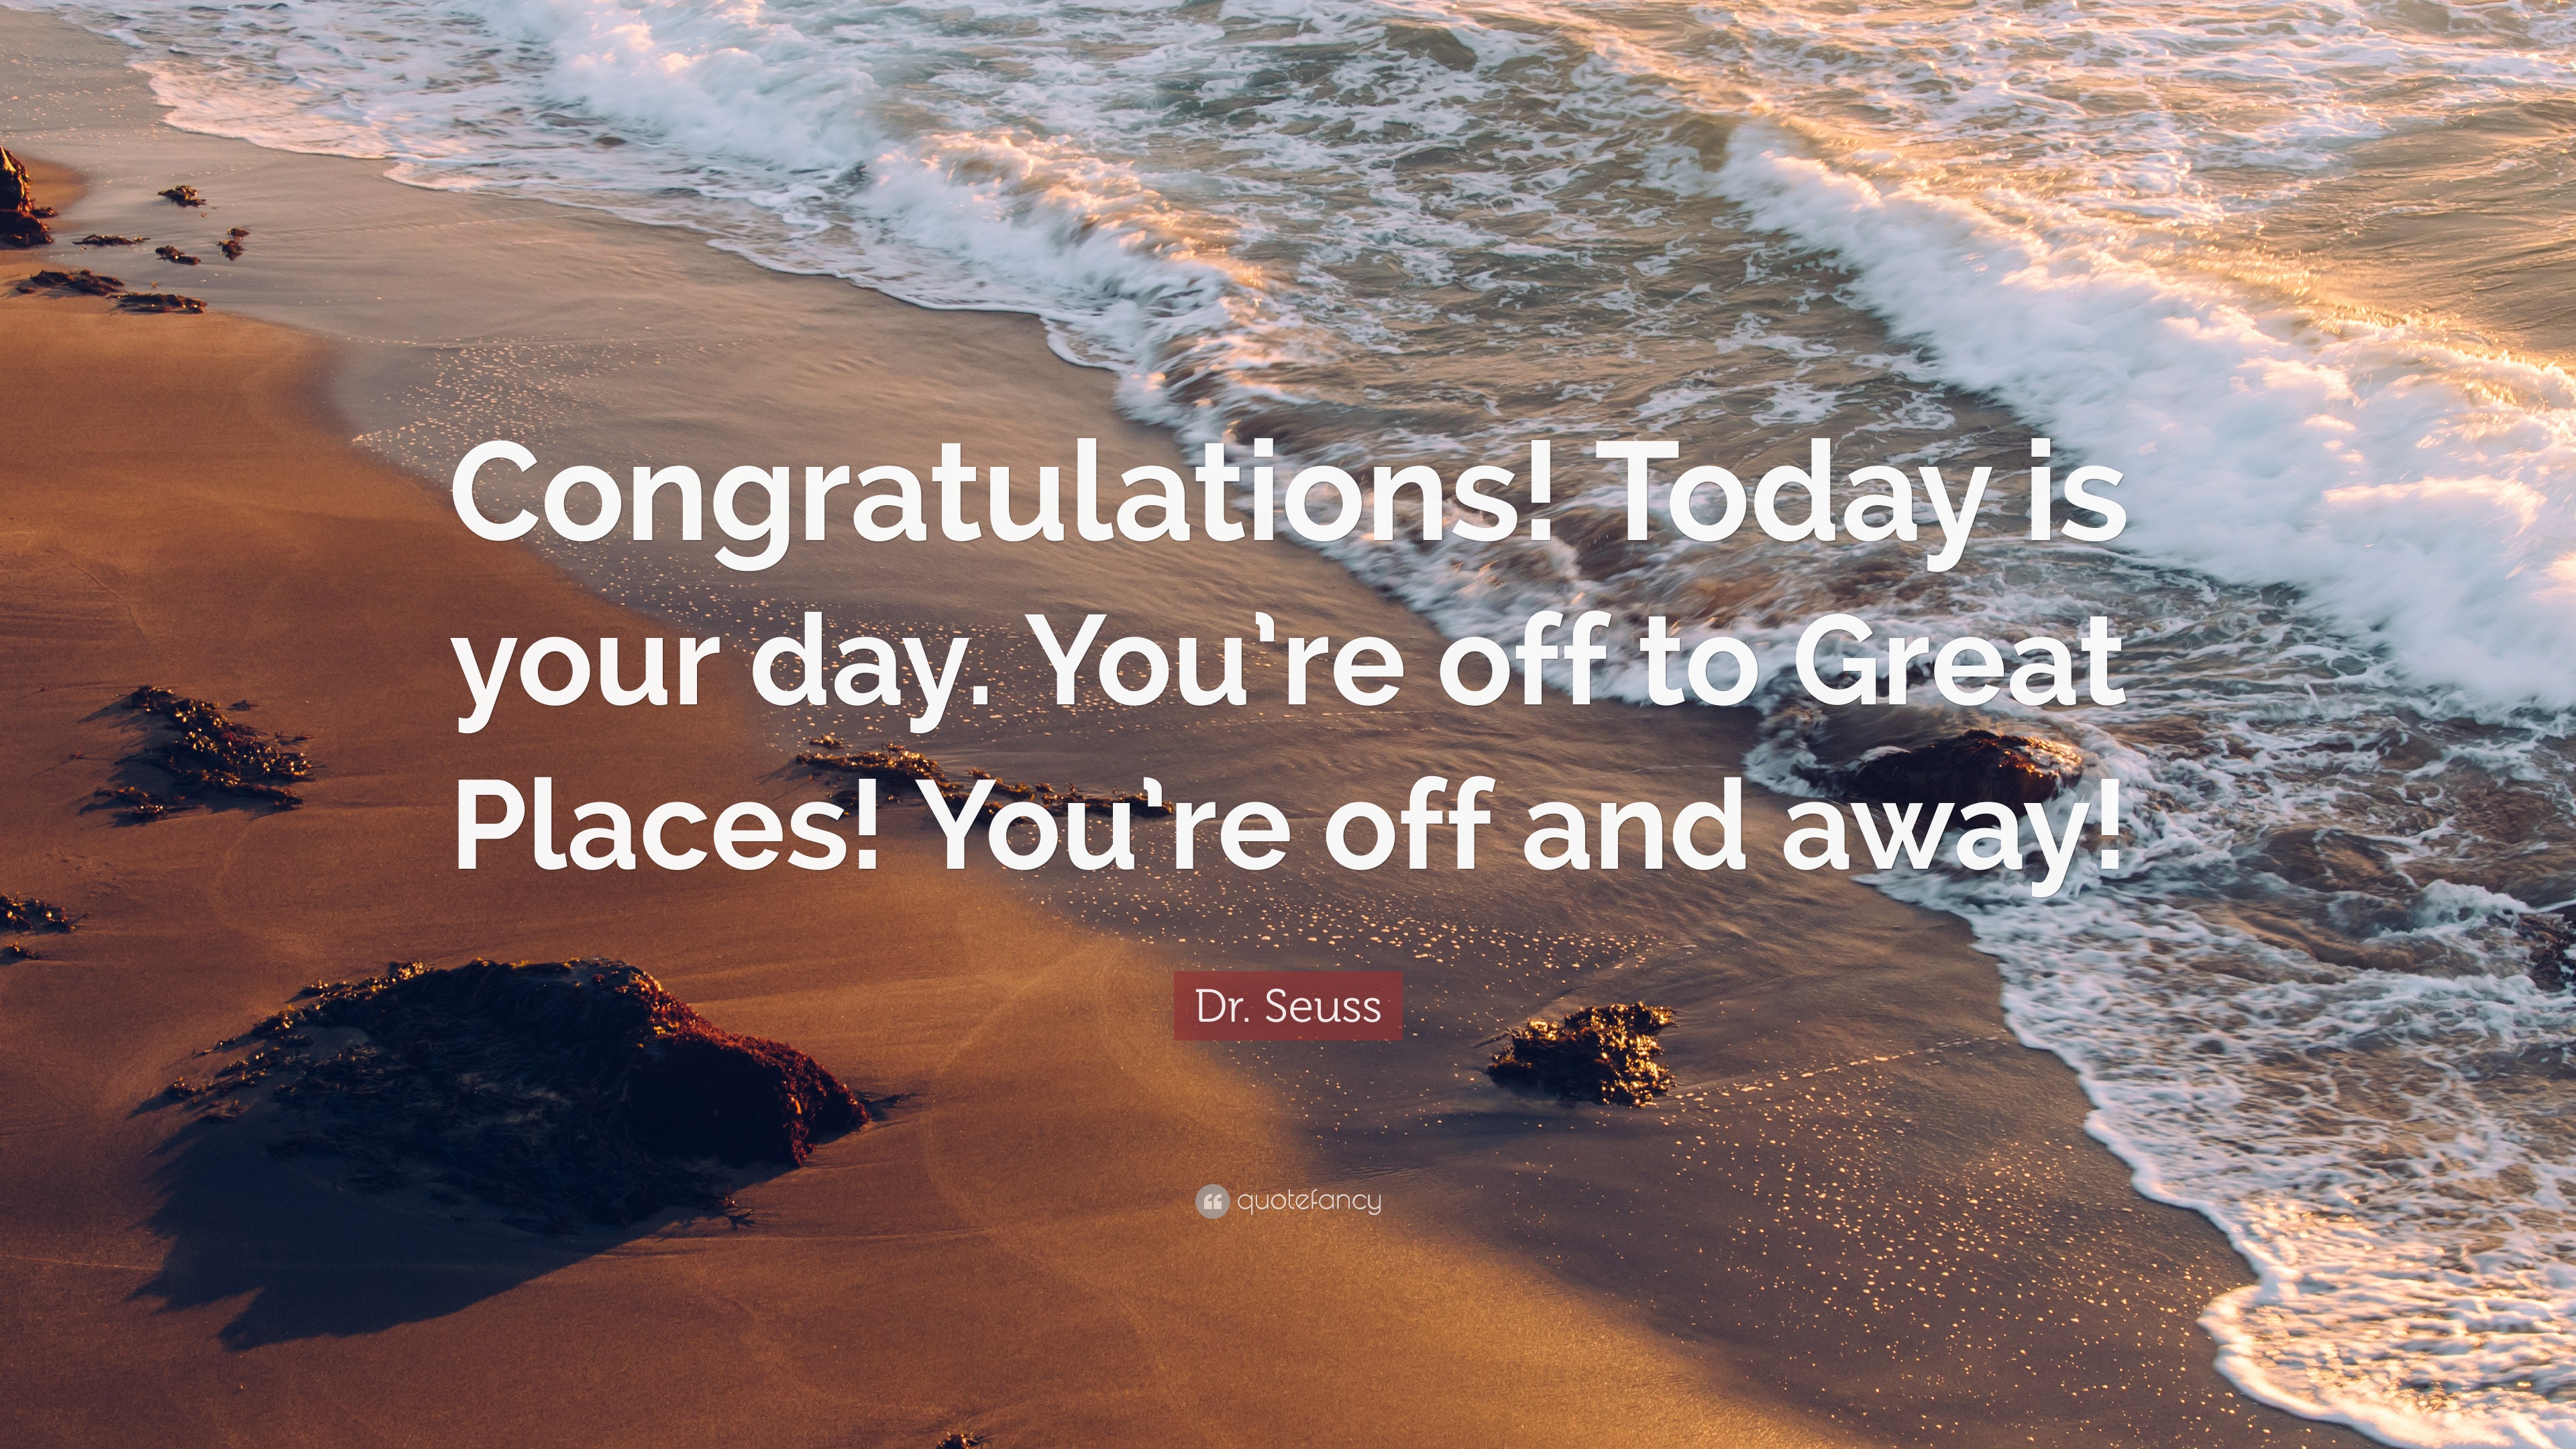 dr-seuss-quote-congratulations-today-is-your-day-you-re-off-to